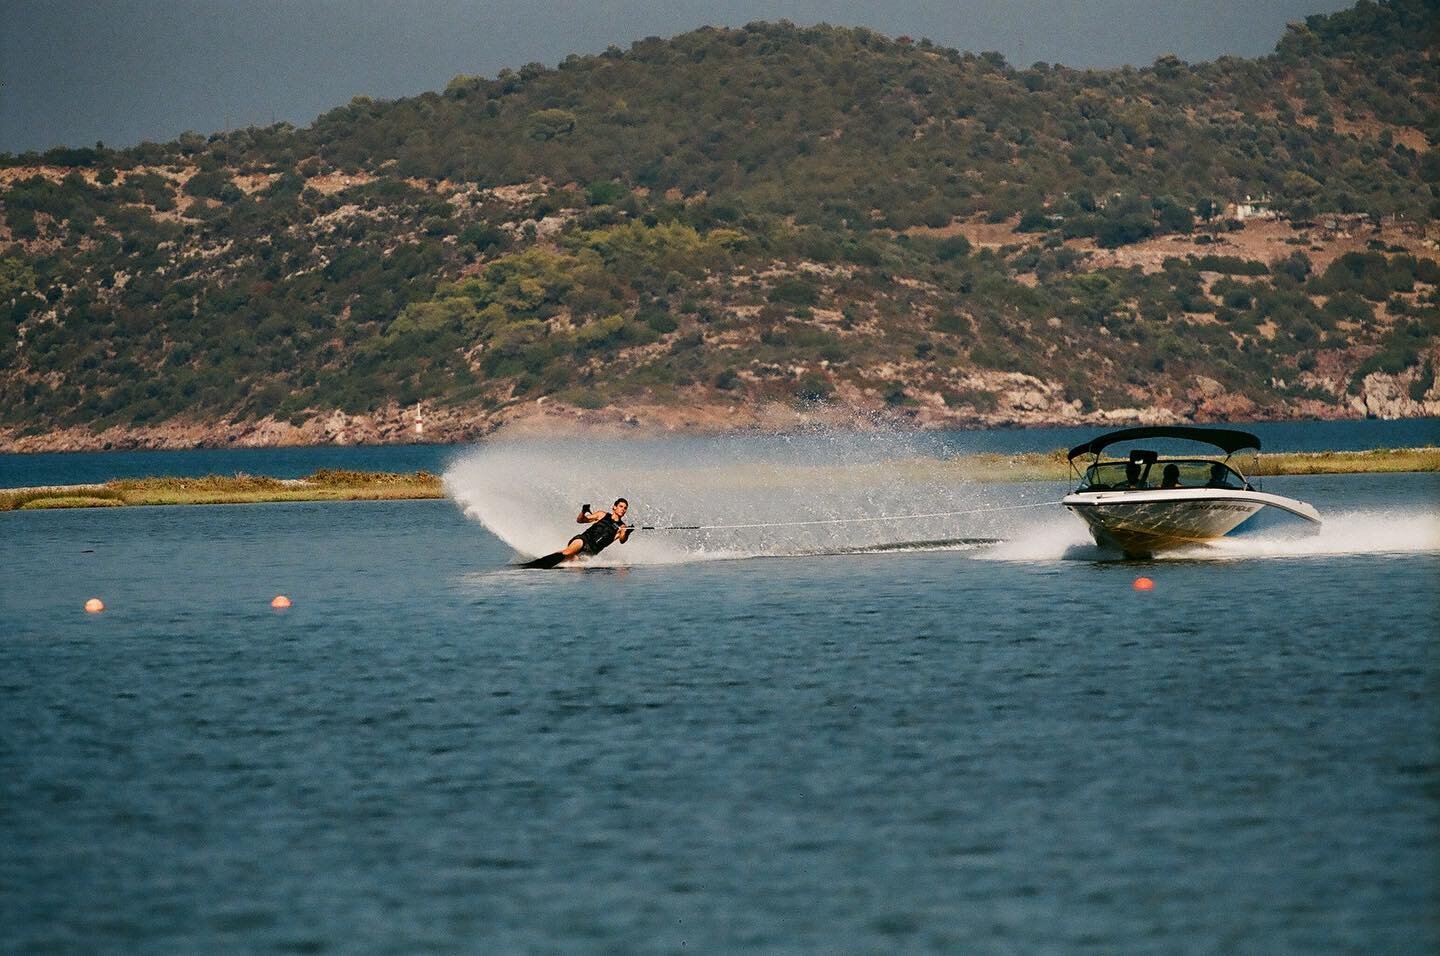 Congrats to our good friends Sotiris Kyprios &amp; Philipos Kyprios on their respective wins in the first national waterskiing competition of the season! @philiposkyprios tied the national record with 2/10,25/58! If you&rsquo;re looking to carve arou